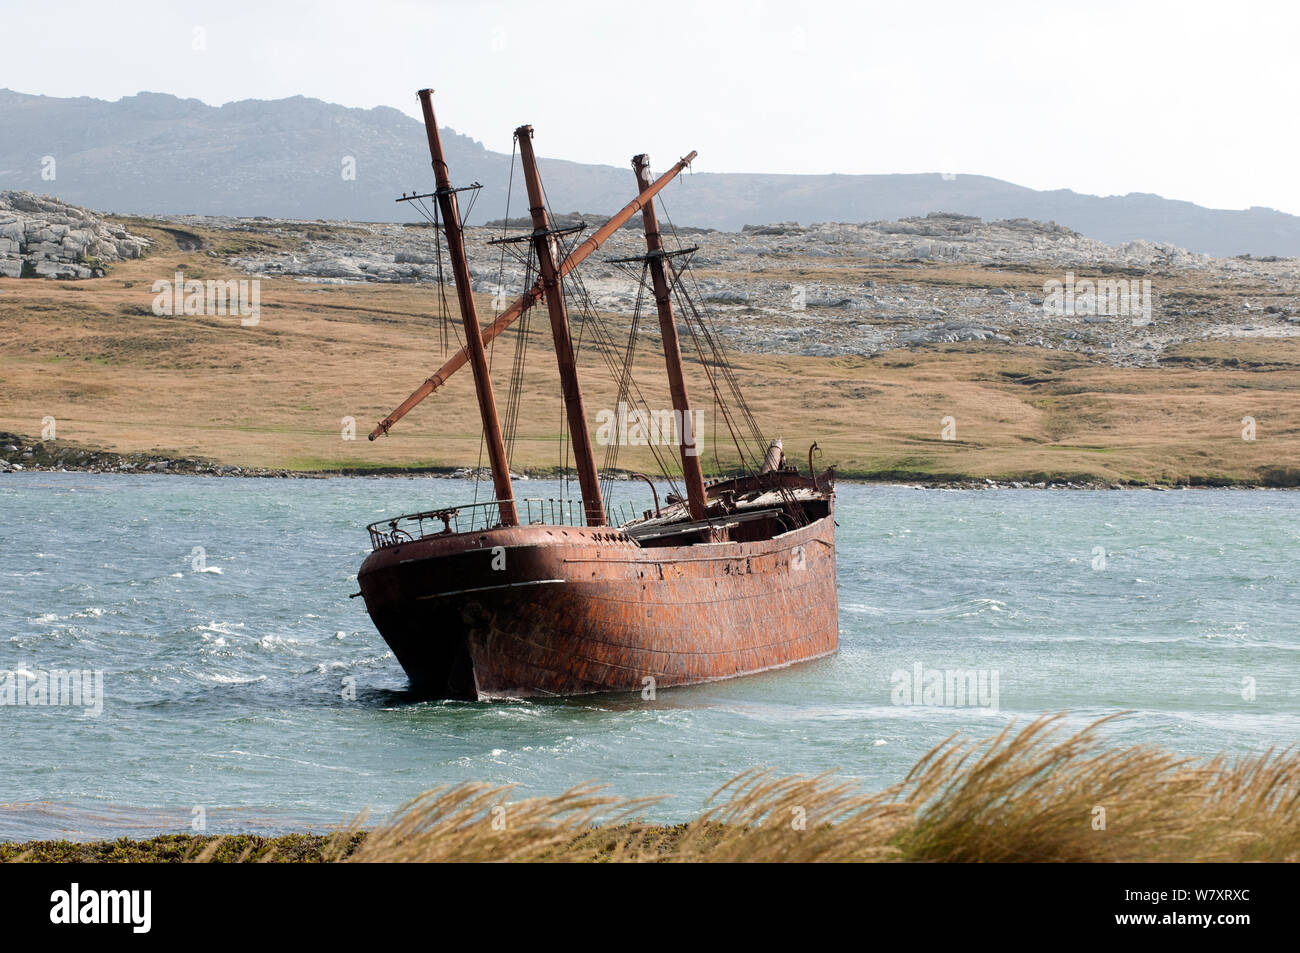 Lady Elizabeth shipwreck, Whale Bone Cove, Falkland Islands. The ship was built in Sunderland, England, and launched on the 6th June 1879. March 2014. Stock Photo